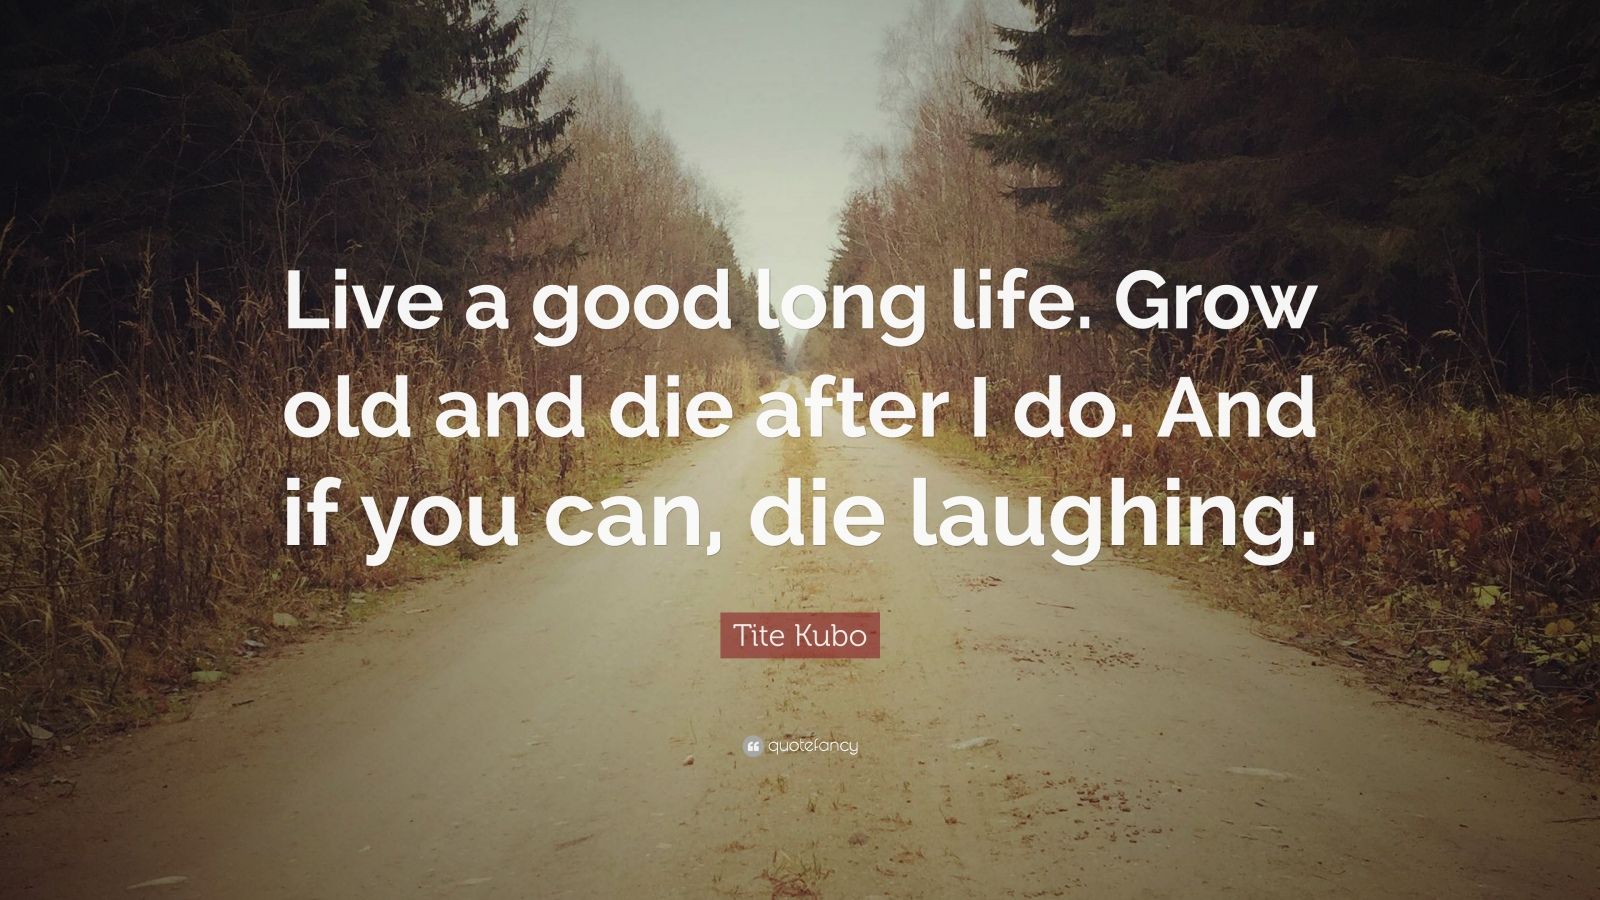 Tite Kubo Quote: “Live a good long life. Grow old and die after I do